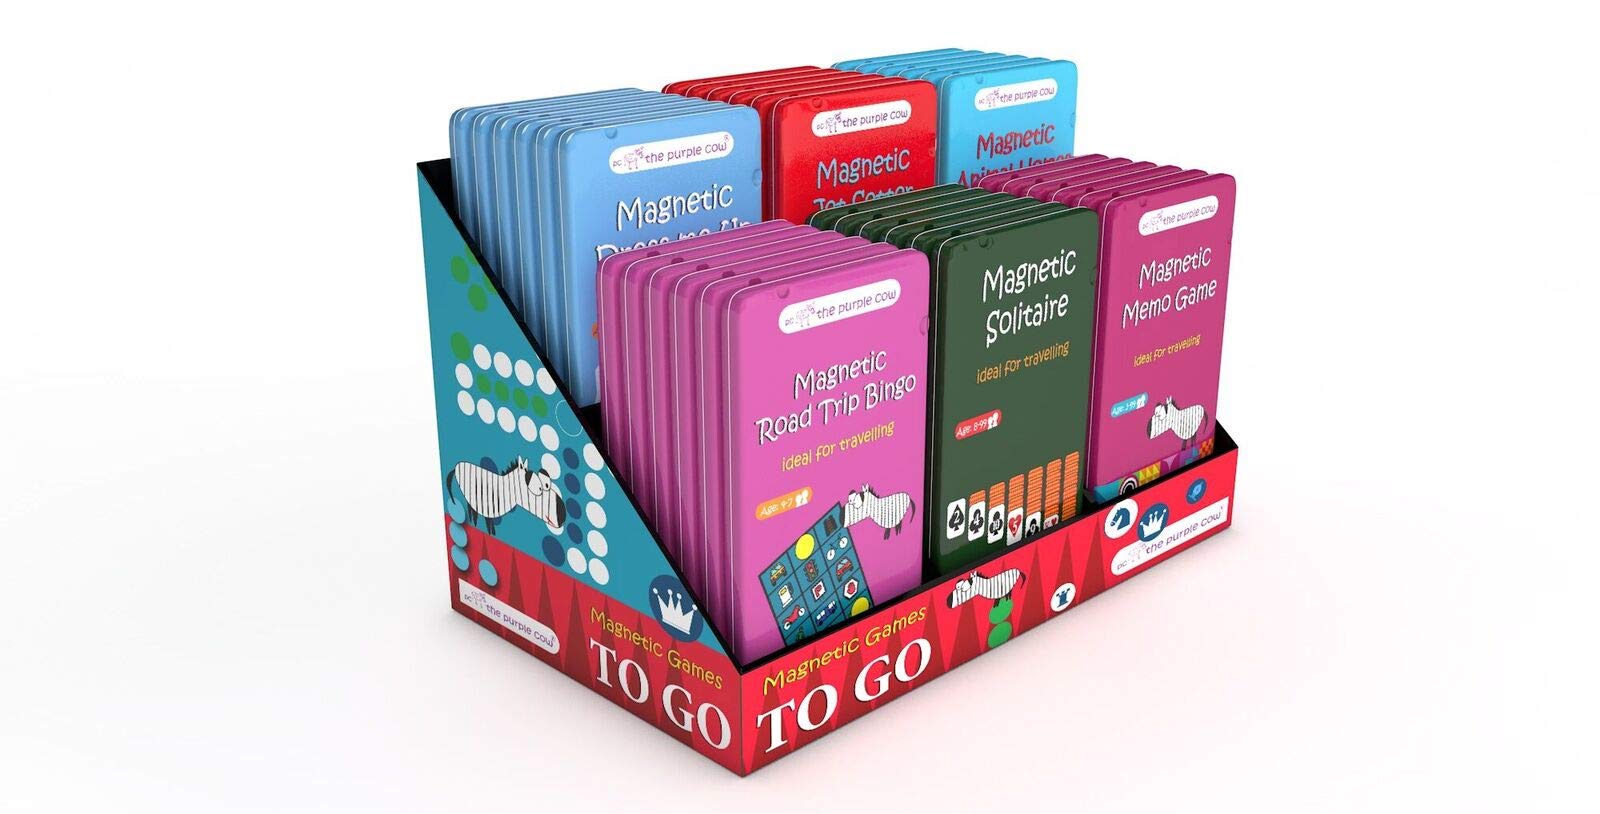 Magnetic Travel Tic Tac Toe - Includes 4 in a Row Game Too - Car Games , Airplane Games and Quiet Games